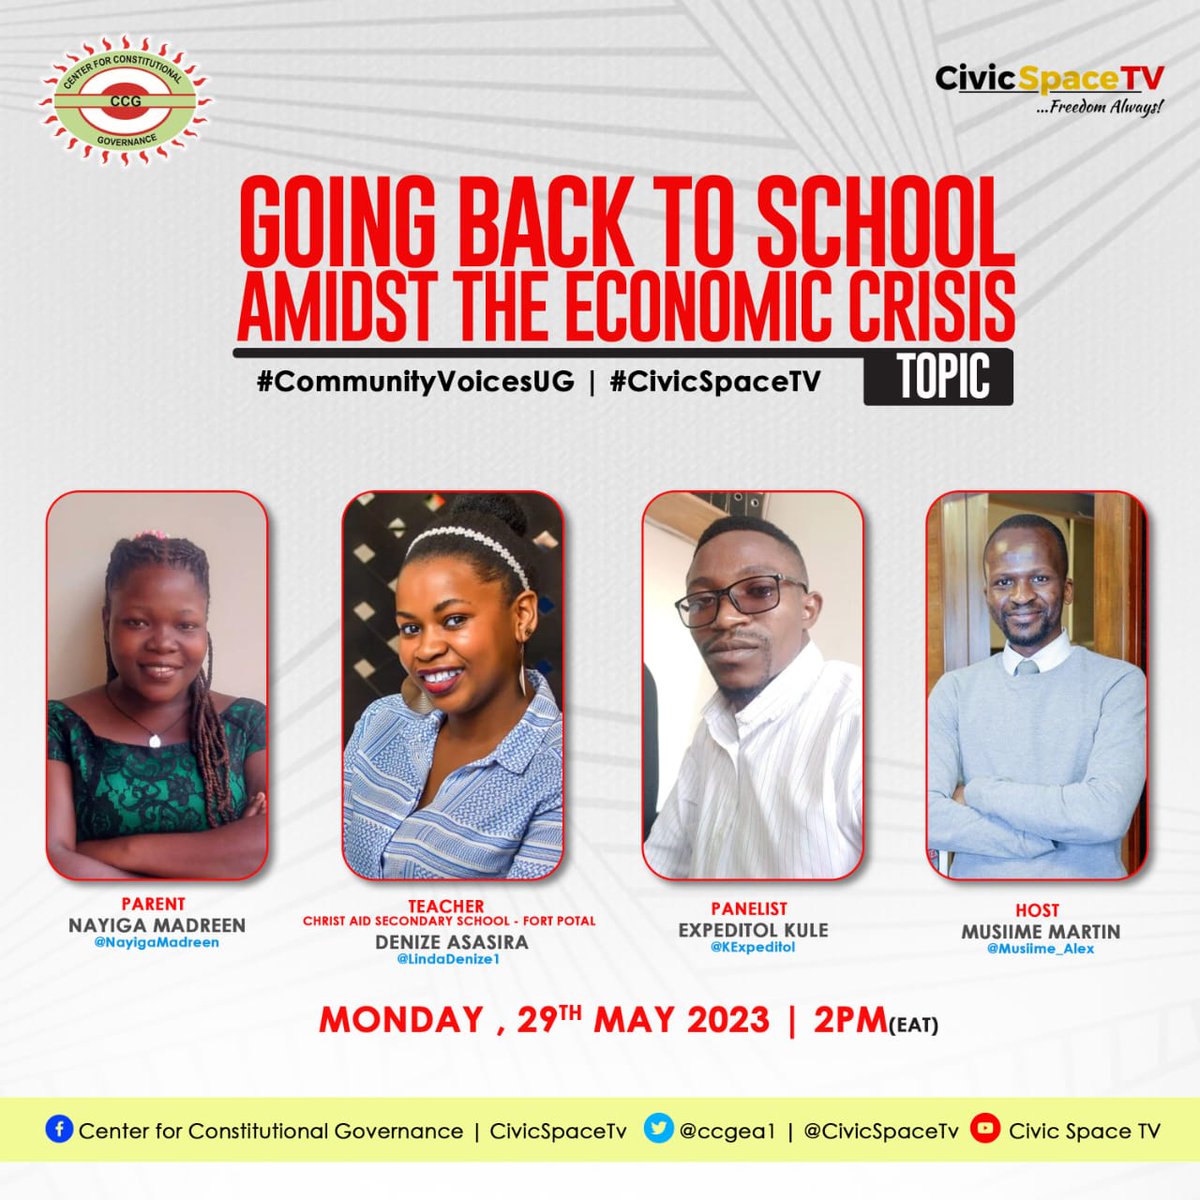 'Make sure your children understand the reality at home, encourage them to be contented with whatever you give them at home.'@NayigaMadreen 
#CommunityVoicesUg
#CivicSpaceTv
#backtoschool